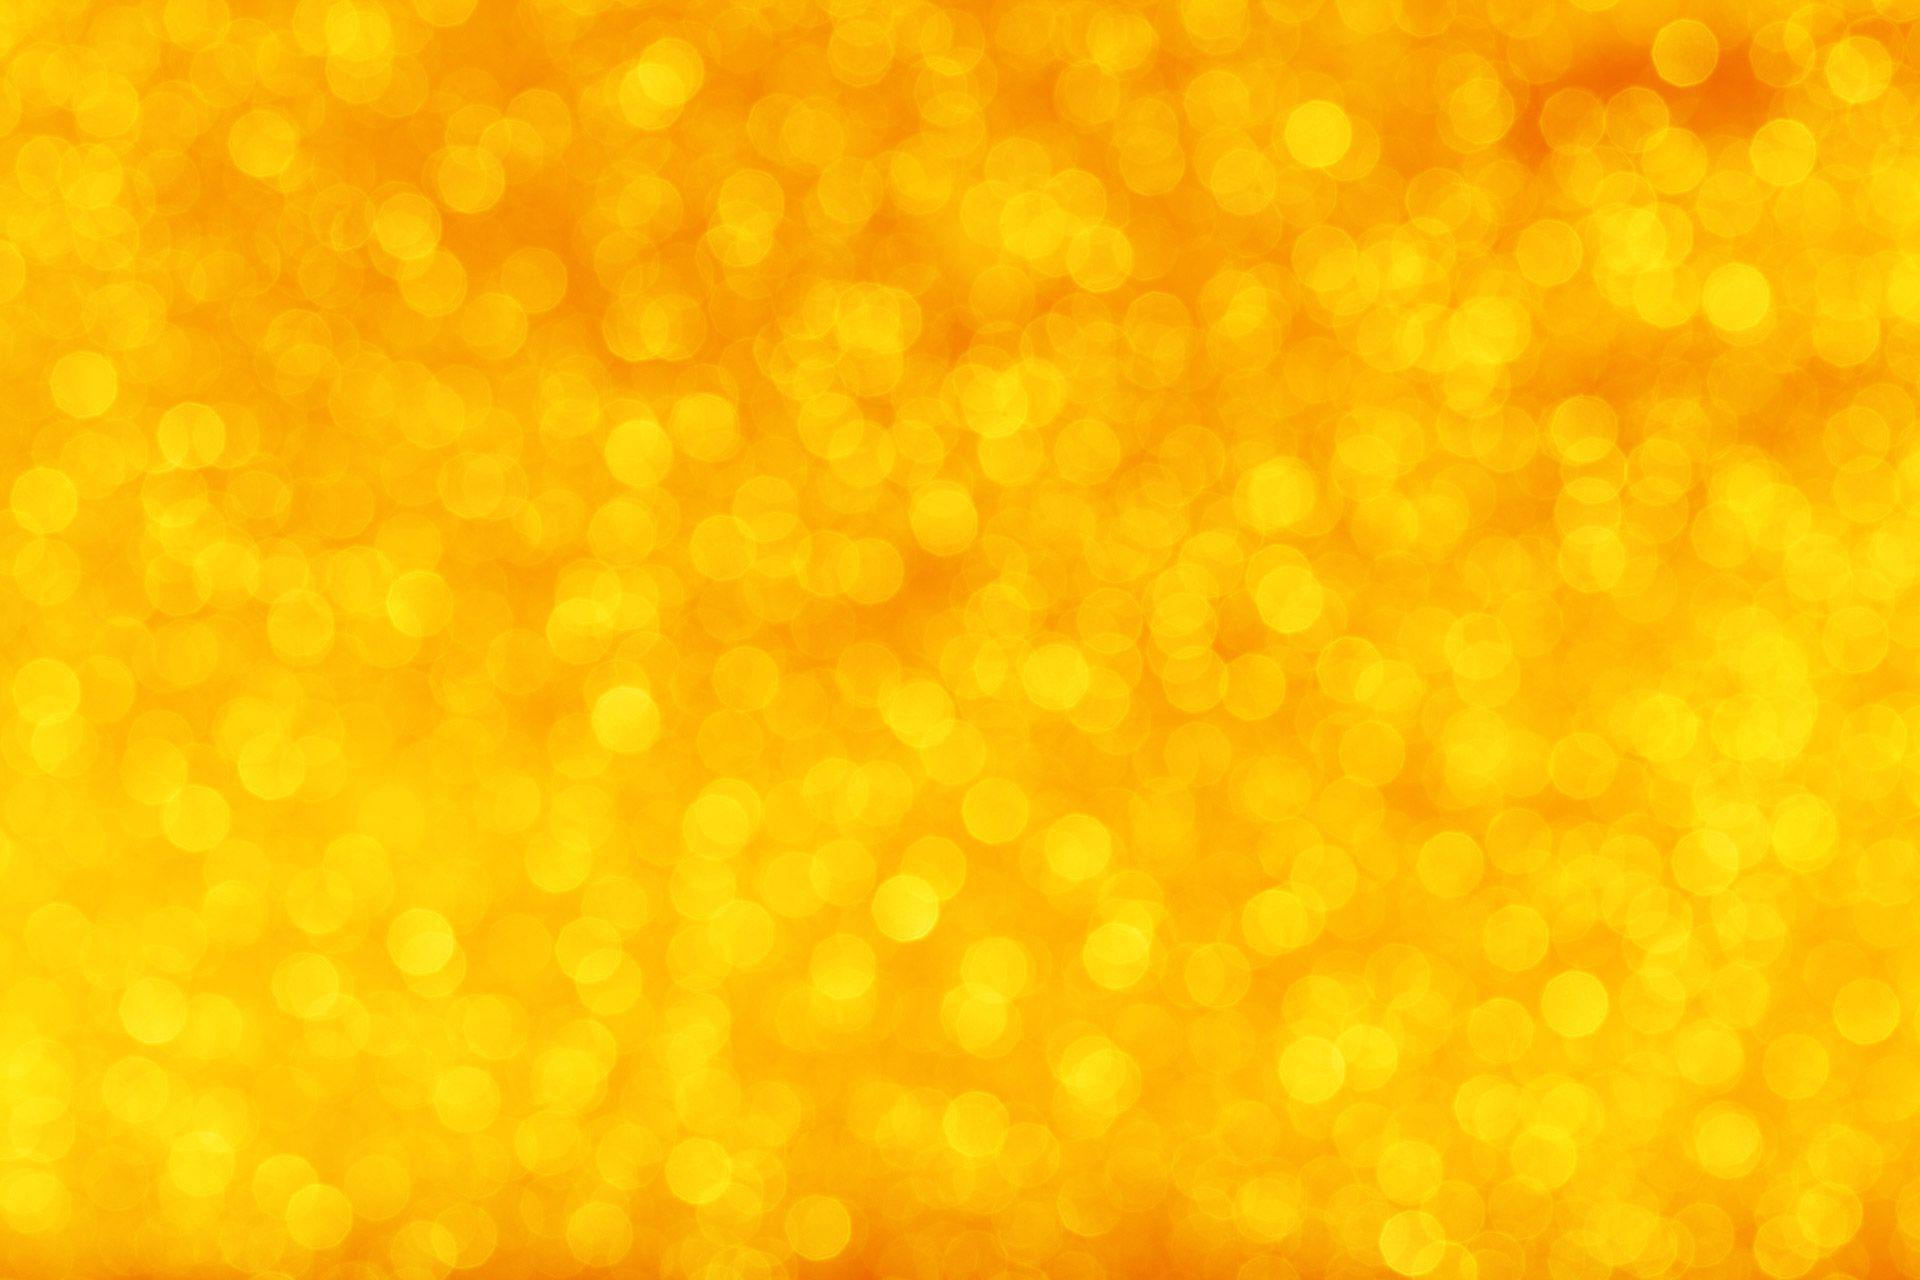 Hd Wallpapers Gold Colour Backgrounds Focus Wallpapers Download 1200